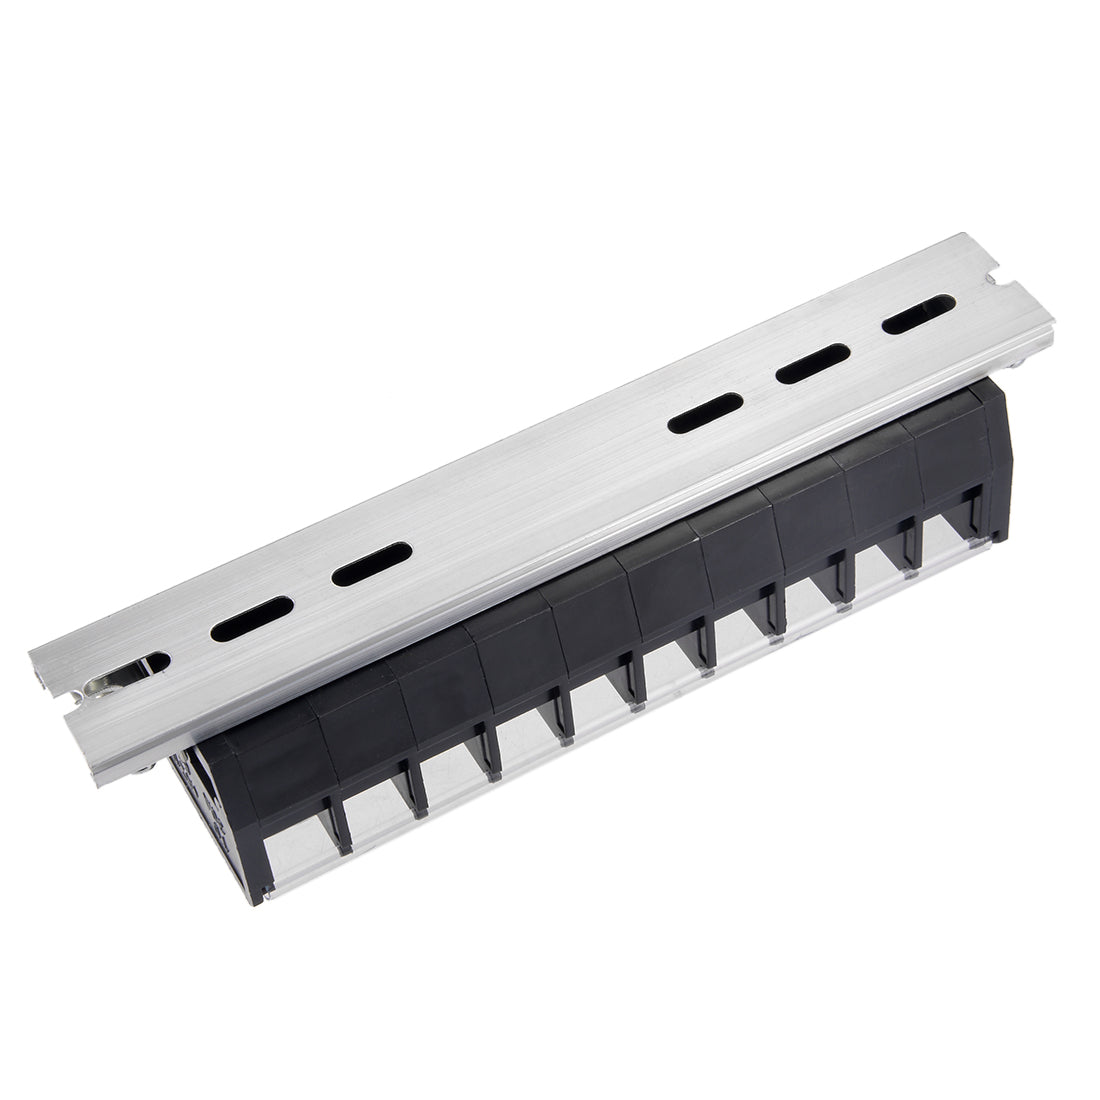 uxcell Uxcell Barrier Terminal Strip Block 660V 30A Dual Rows 10 Position DIN Rail Base Covered Screw